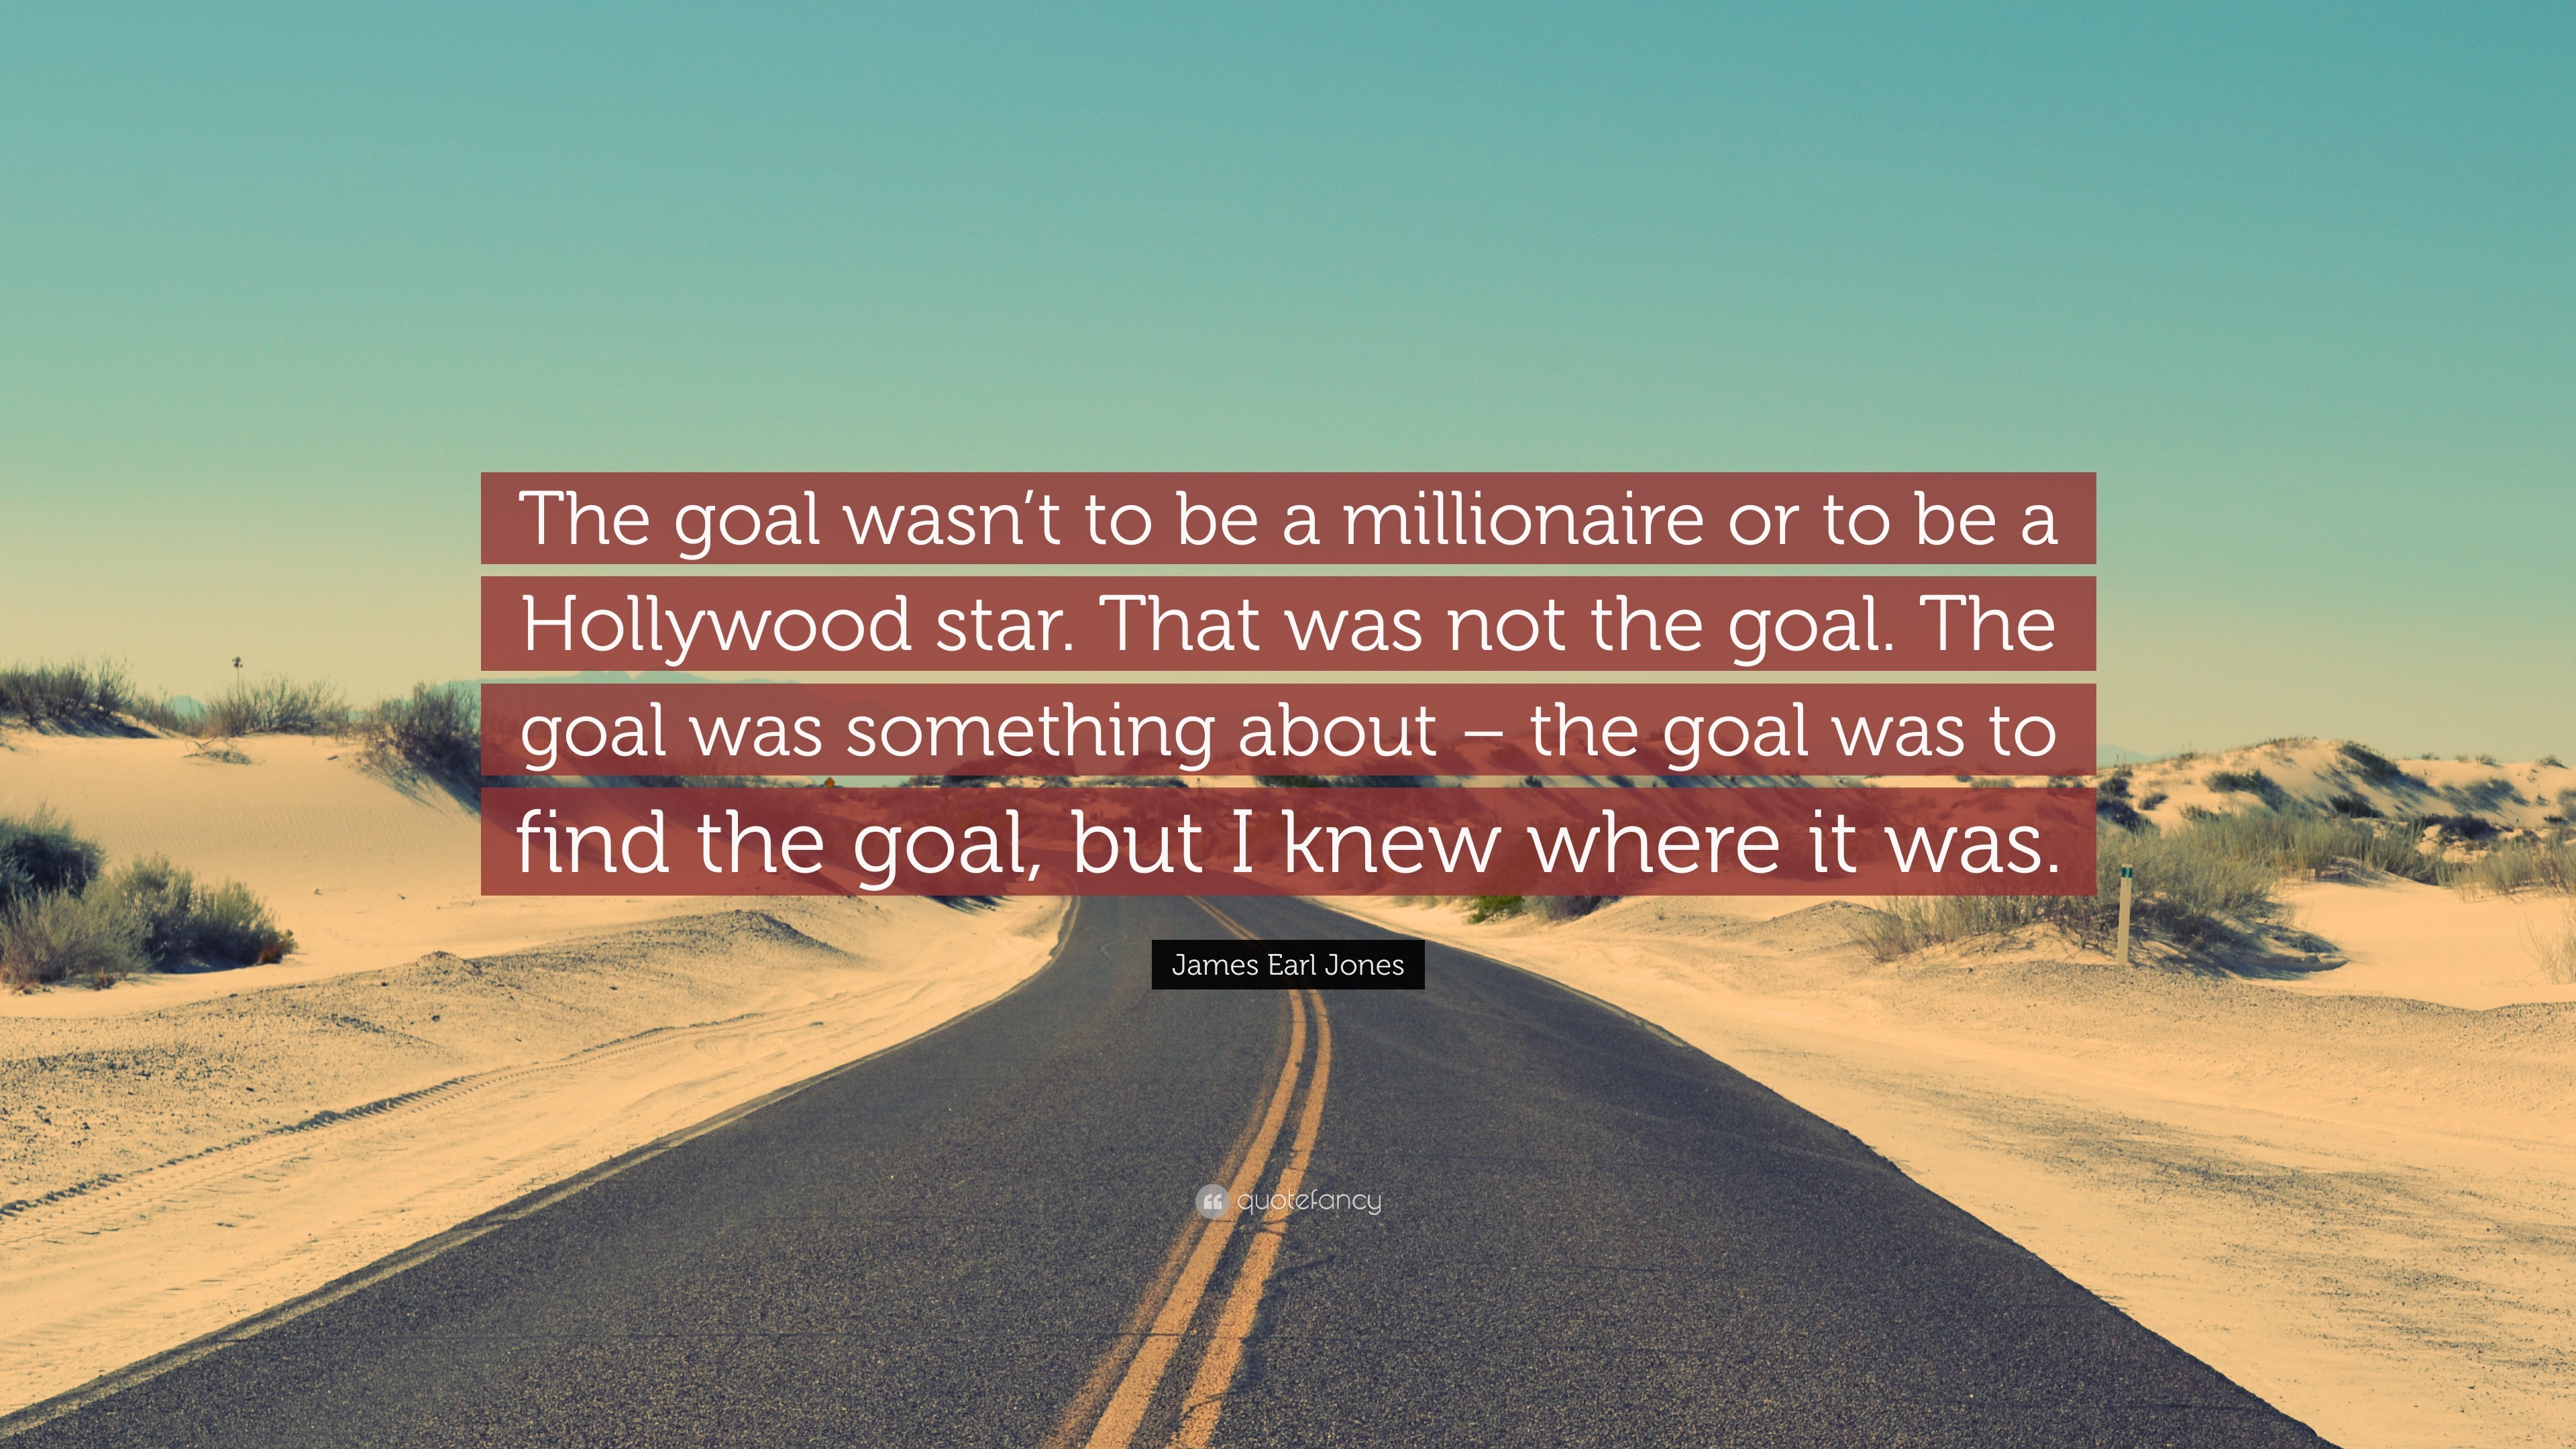 3840x2160 James Earl Jones Quote: “The goal wasn't to be a millionaire or